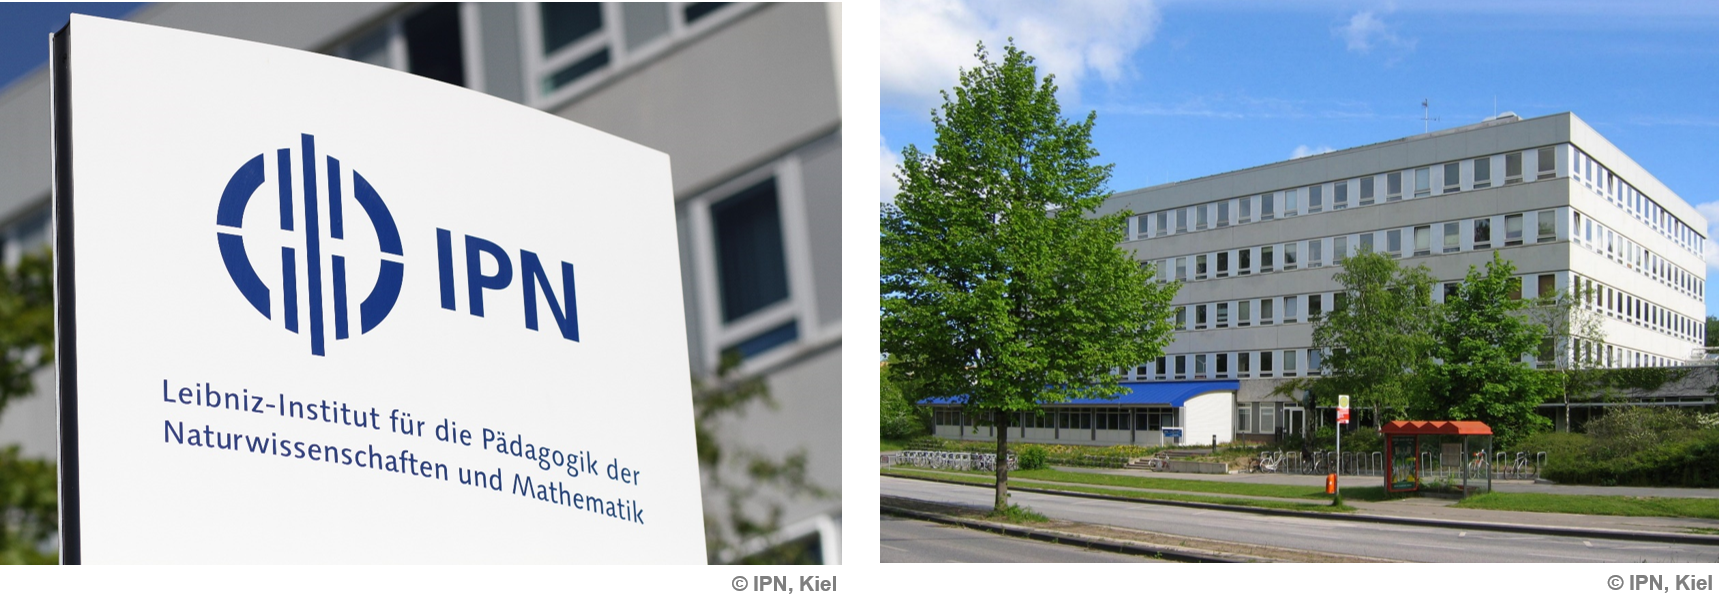 Welcome to the IPN in Kiel